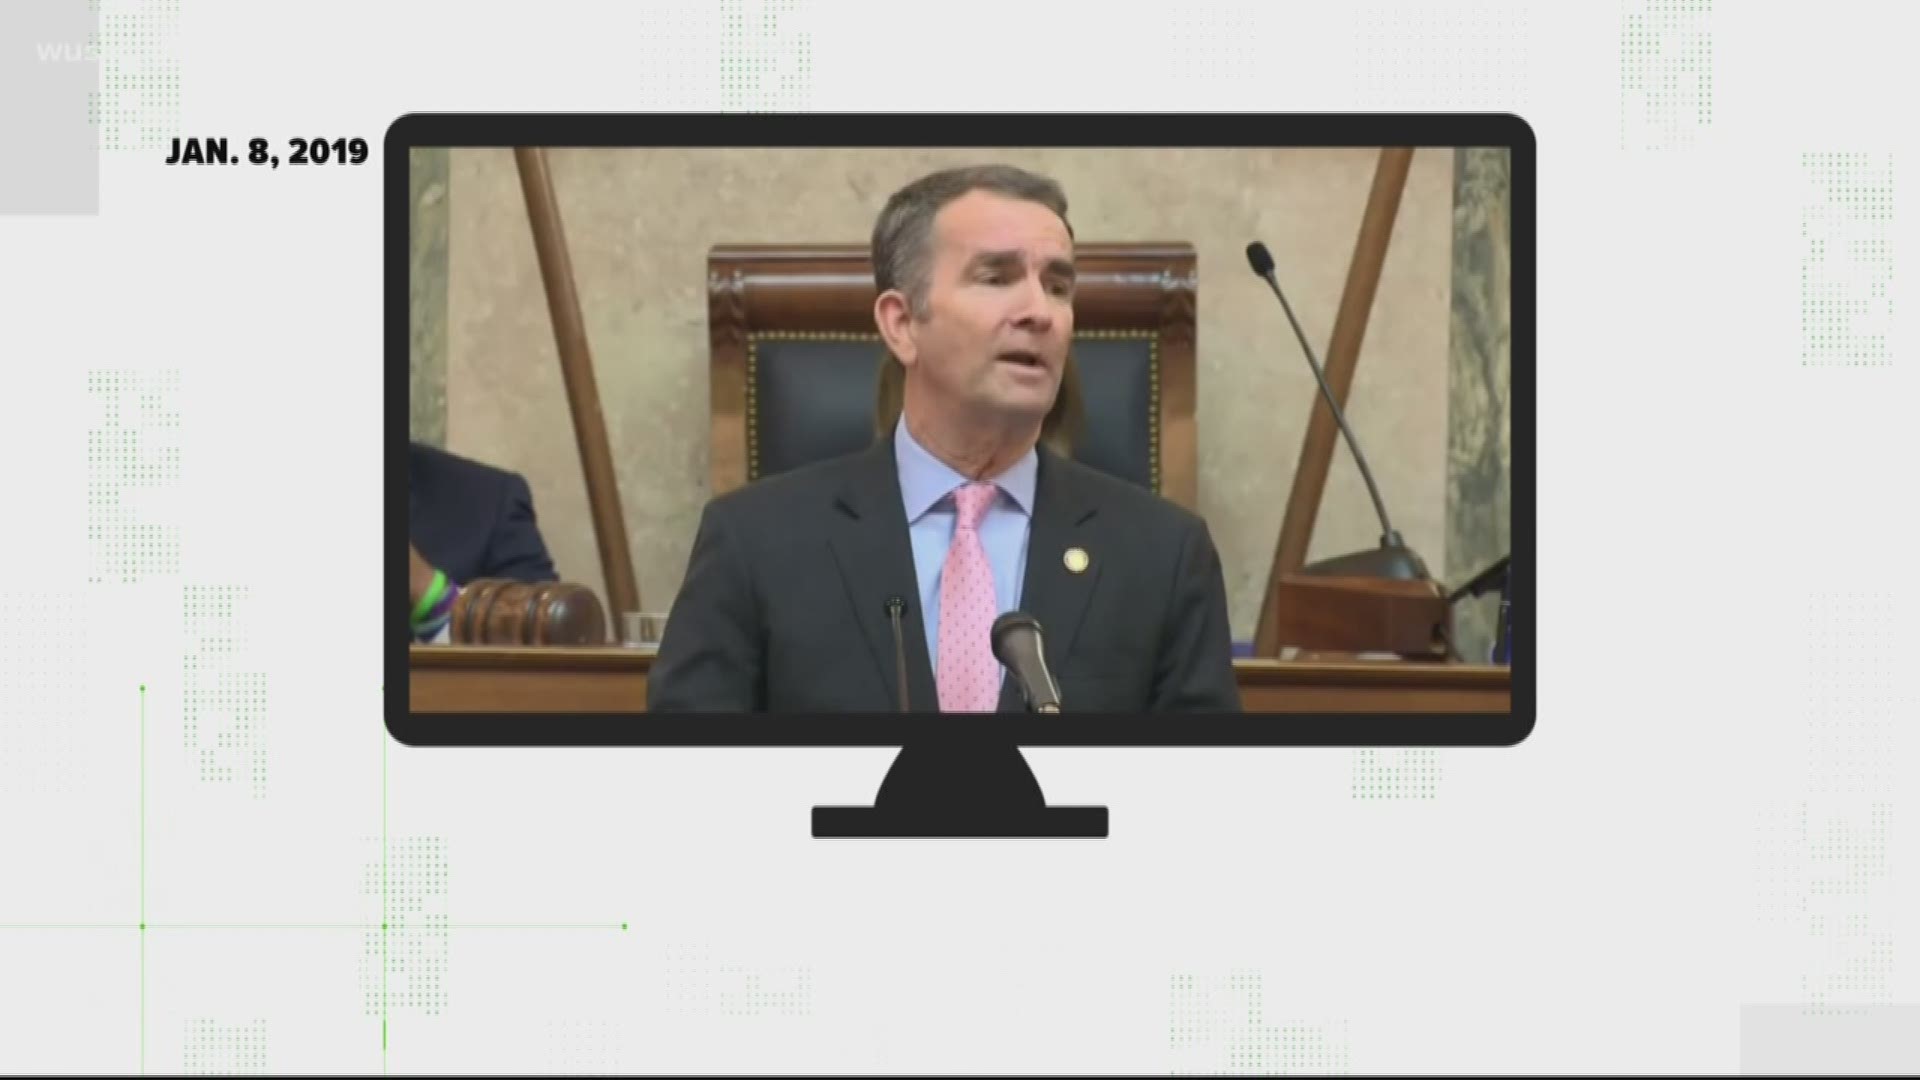 A claim has spread that Gov. Ralph Northam proposed activating the National Guard to confiscate guns. But is that true?